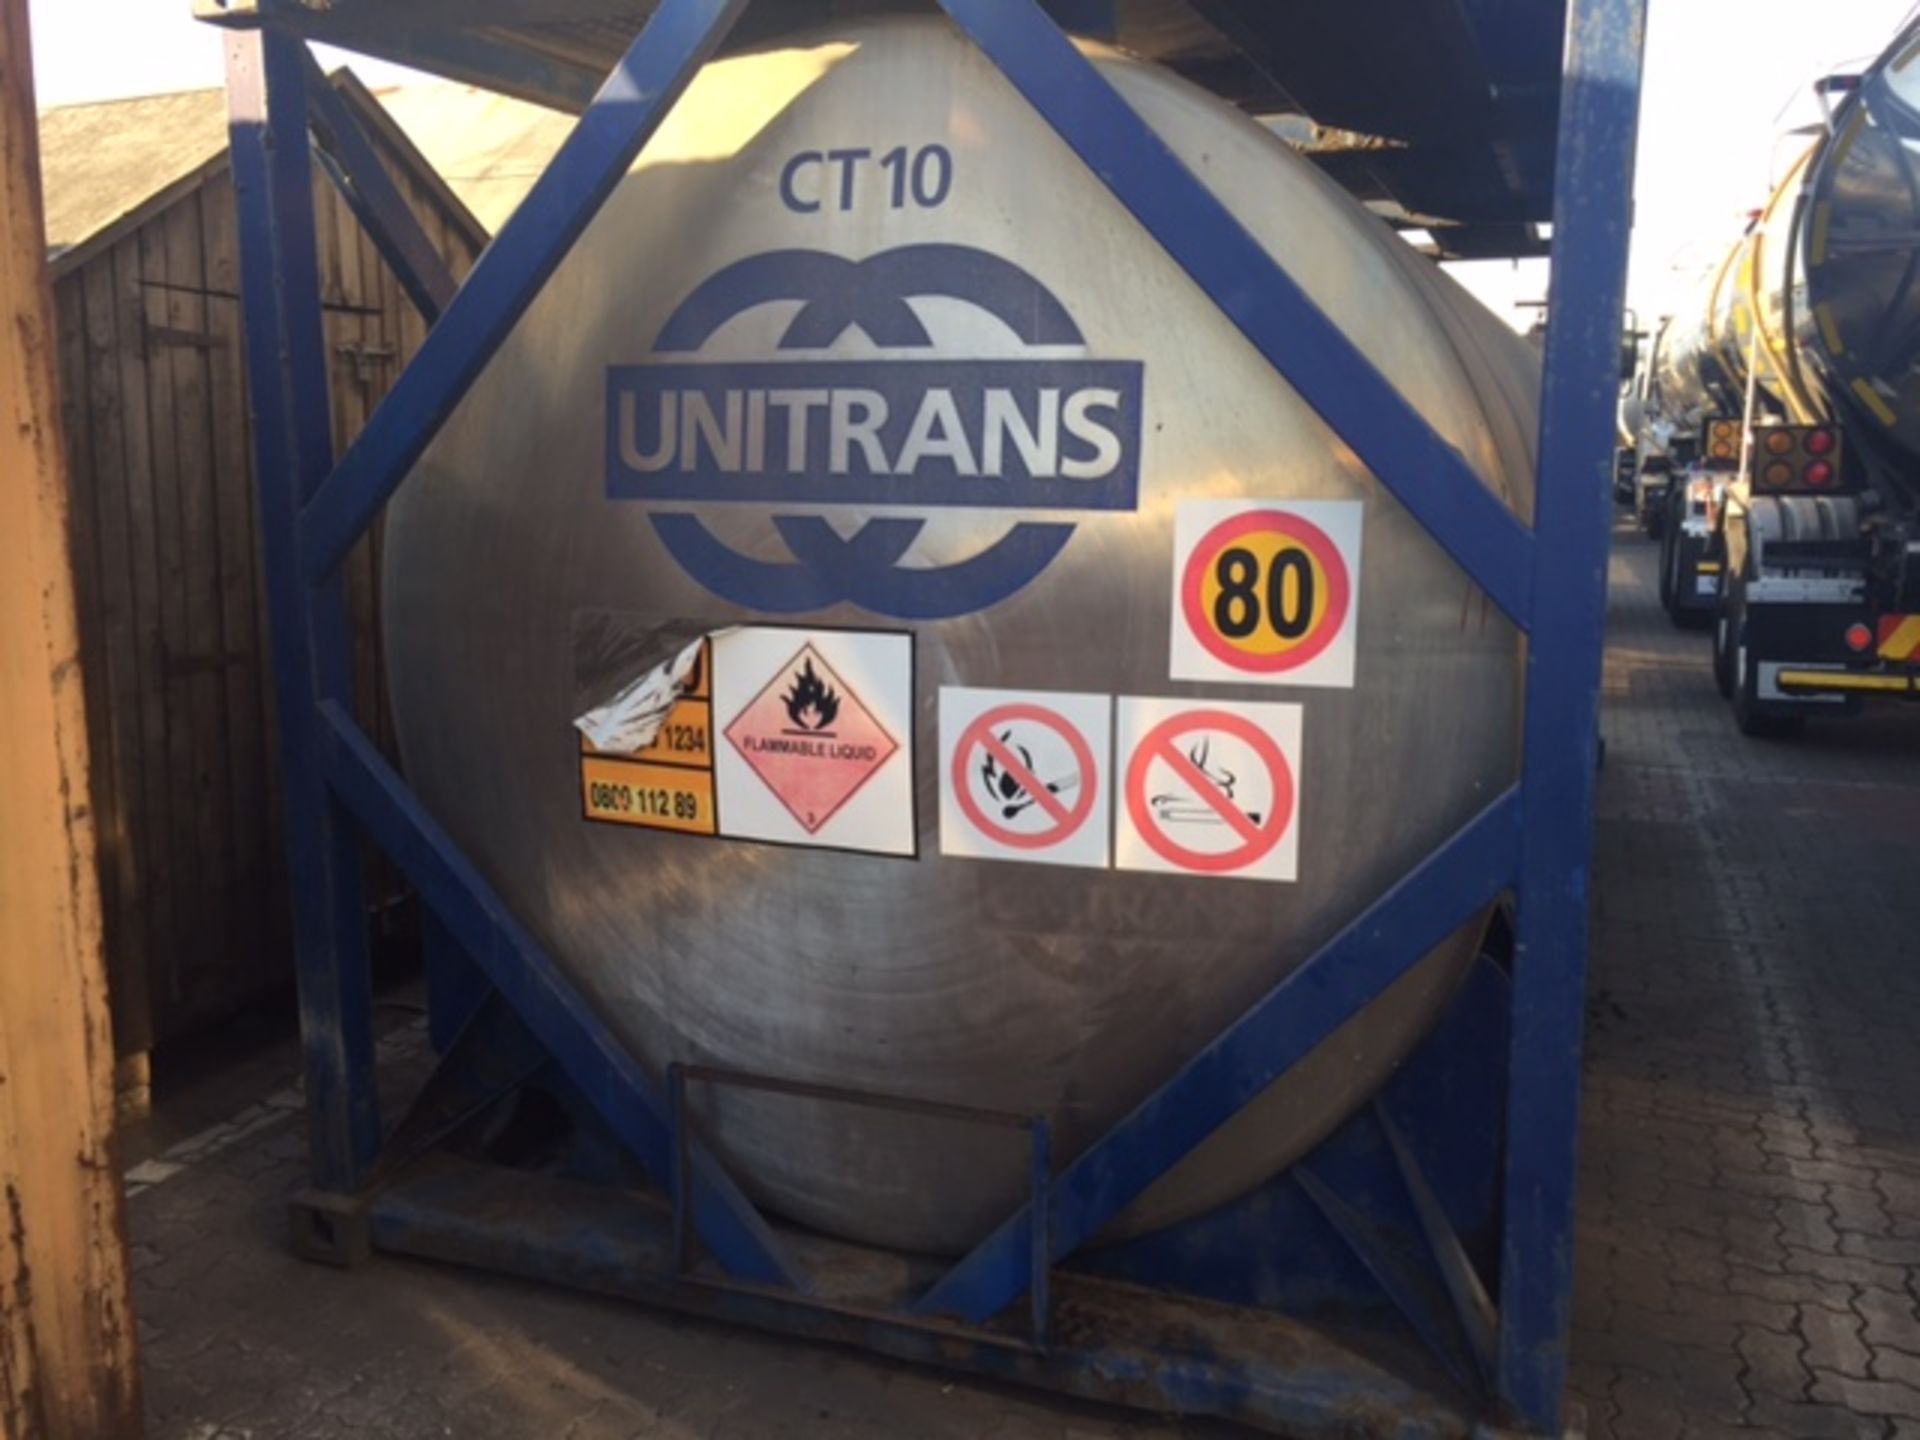 STAINLESS STEEL TANK WITH FRAME- - (CT10) - LOCATION KZN - Subject to Confirmation